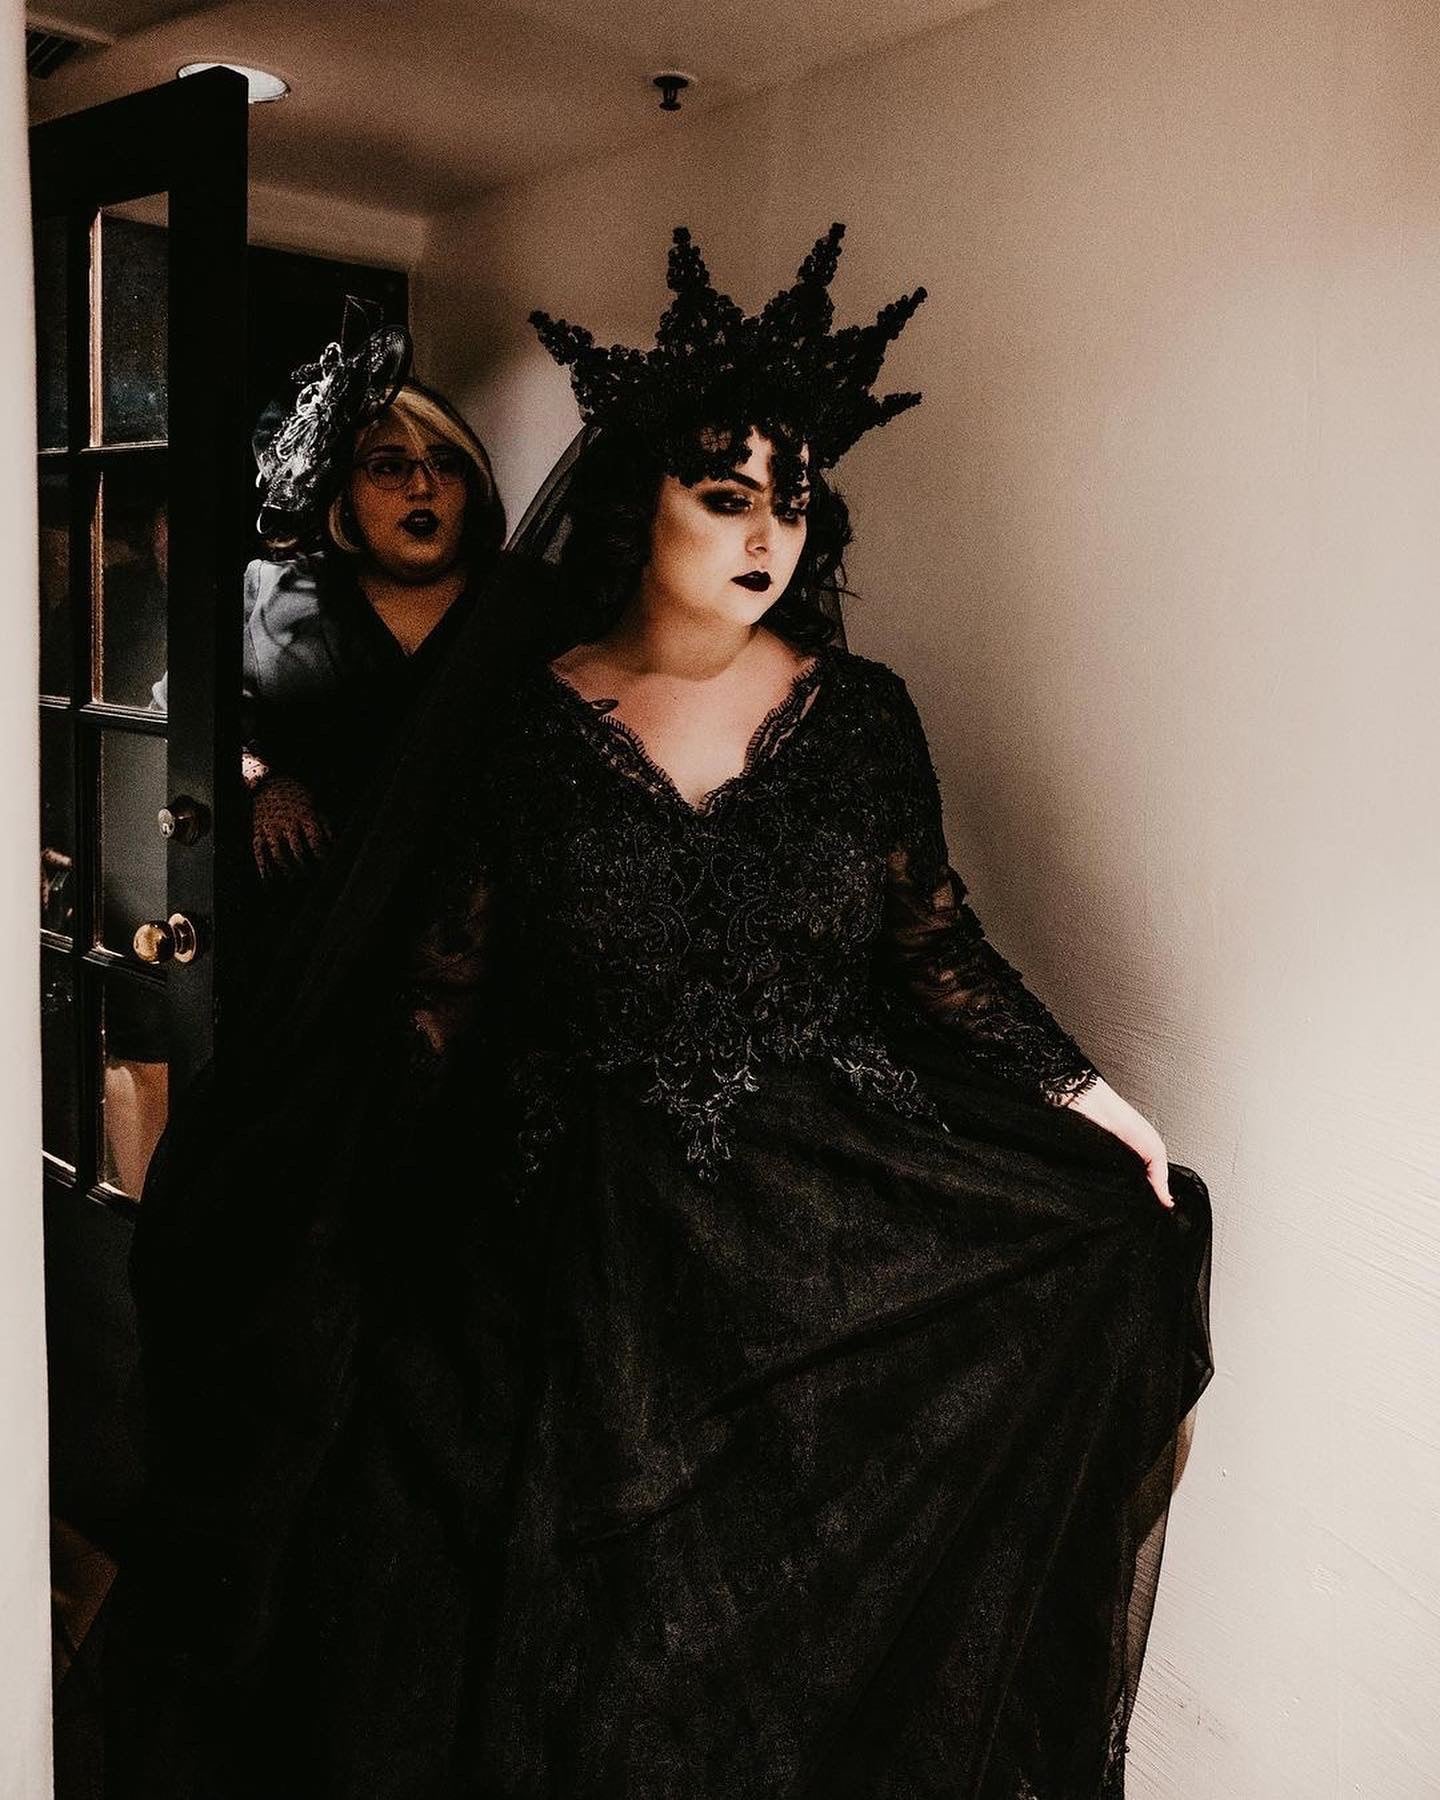 The Luxe Black Wedding Dress - Goth Mall